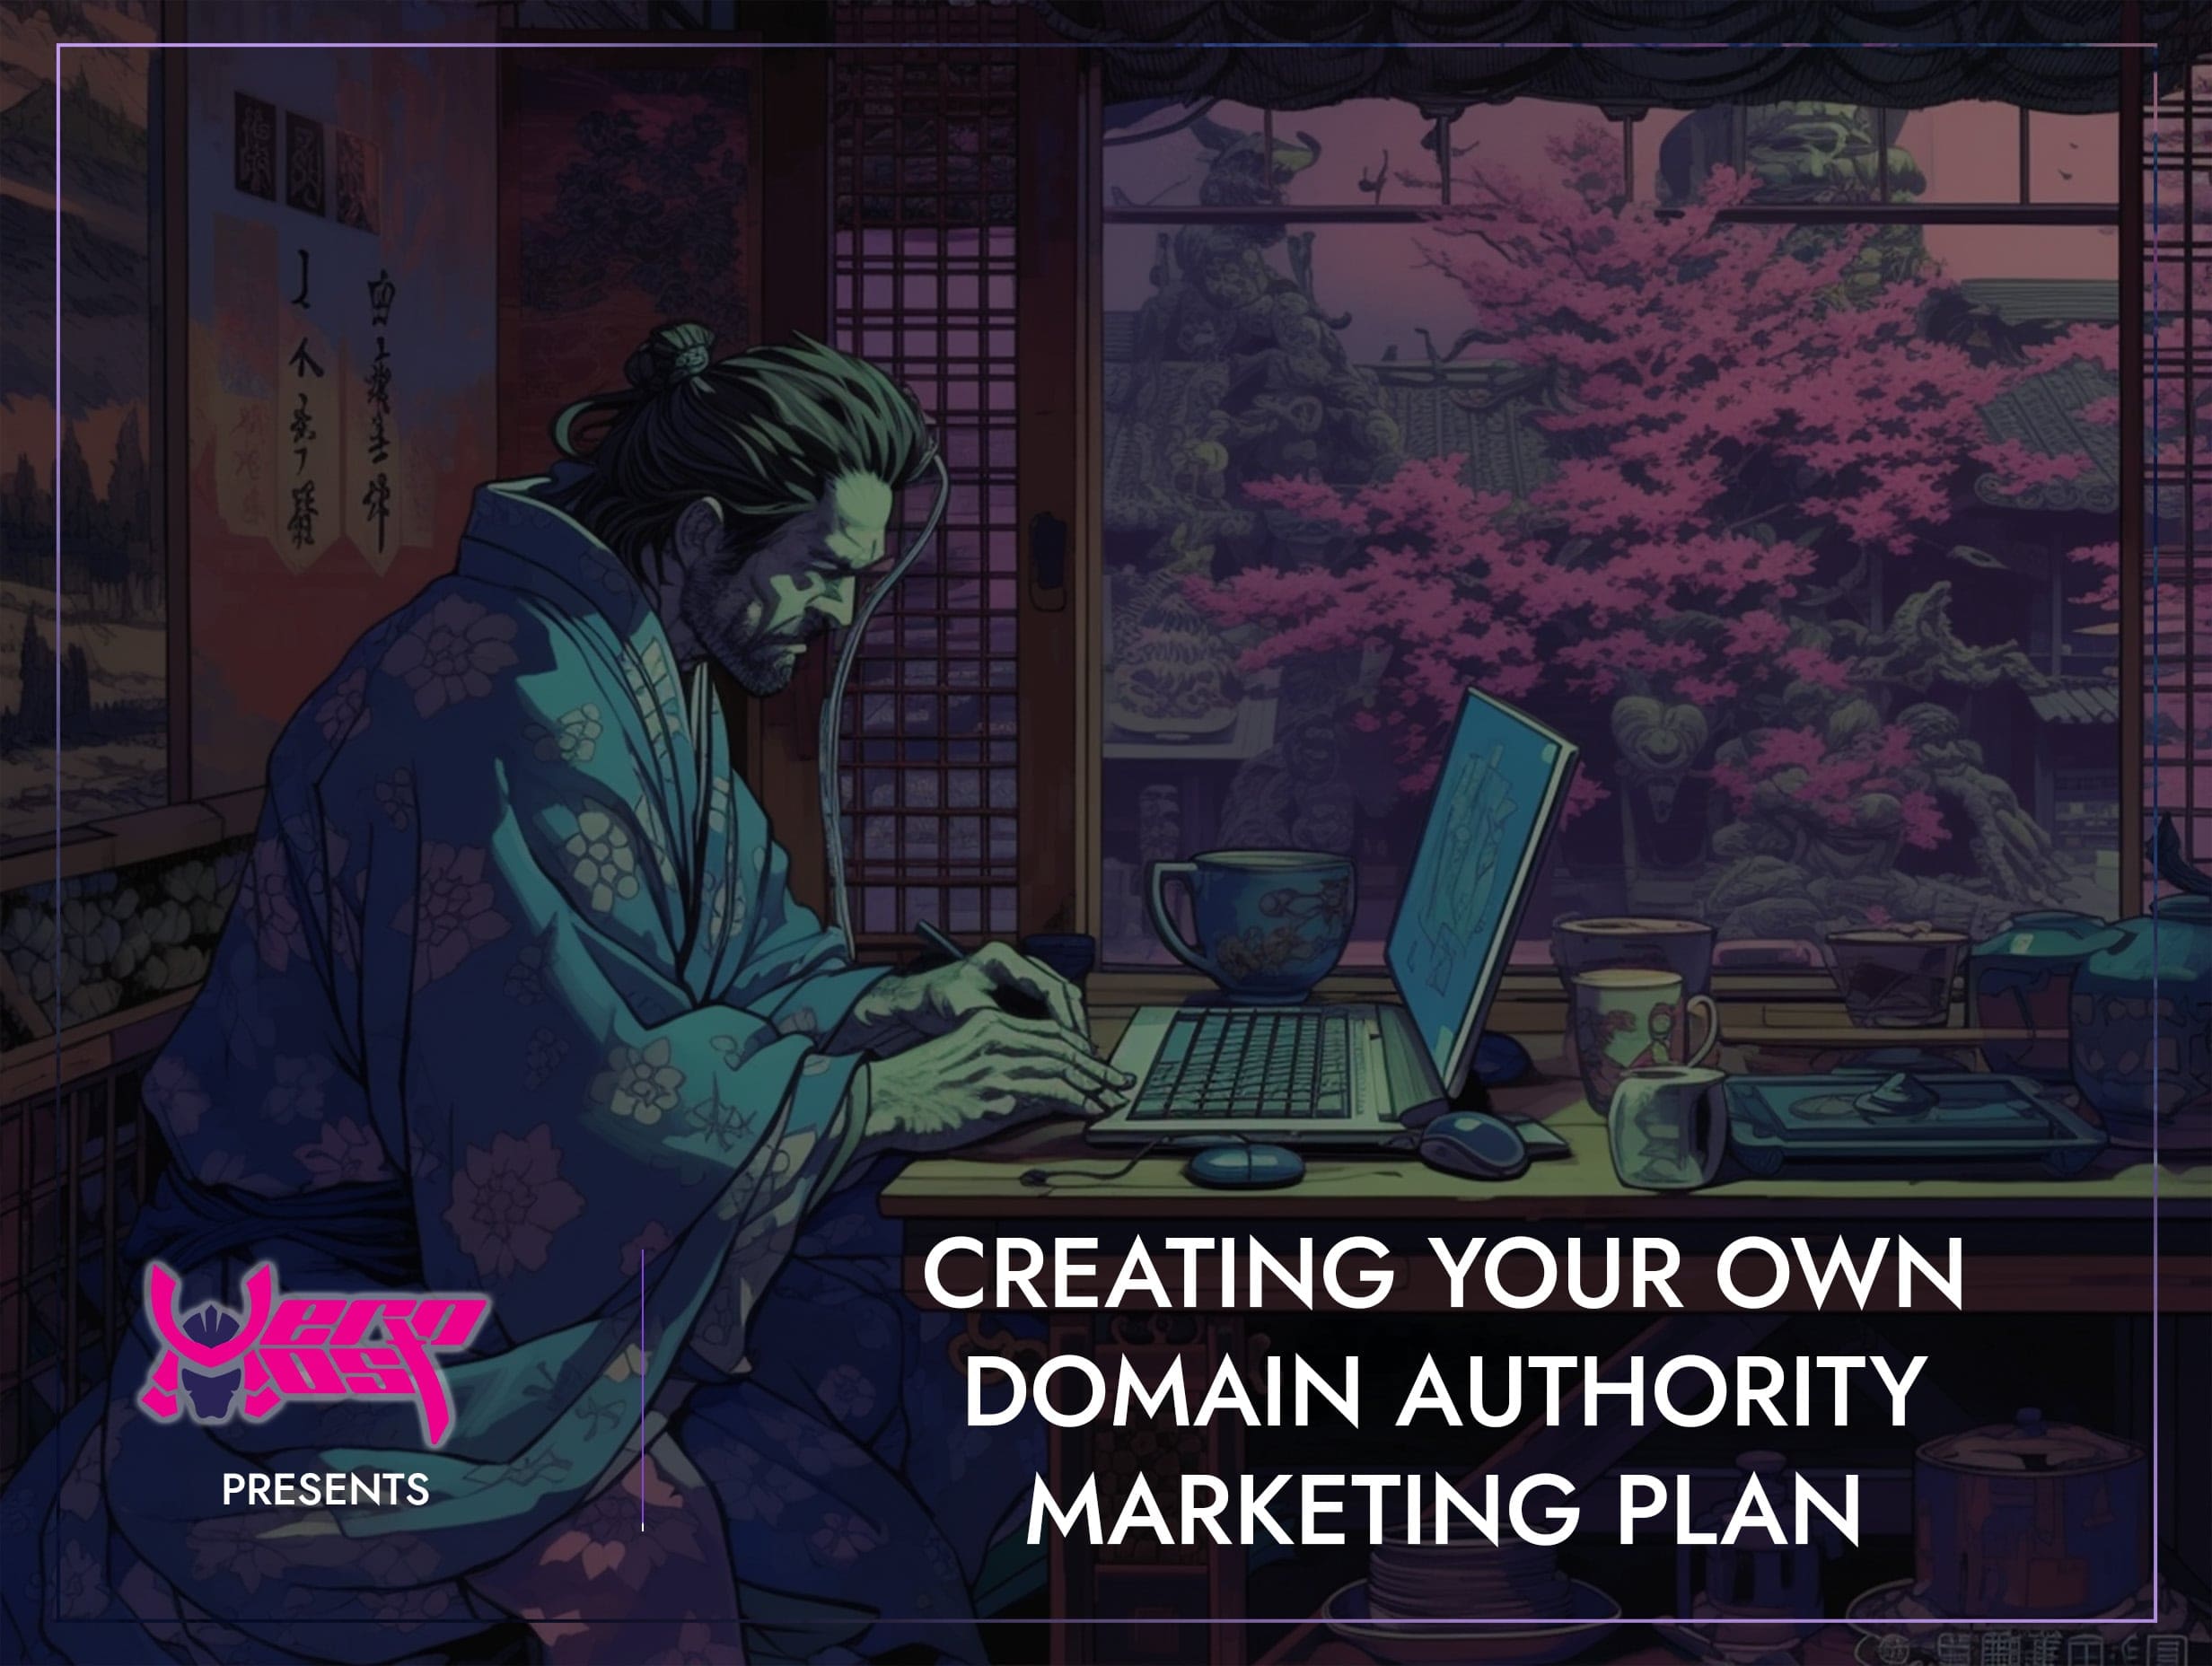 Creating Your Own Domain Authority Marketing Plan